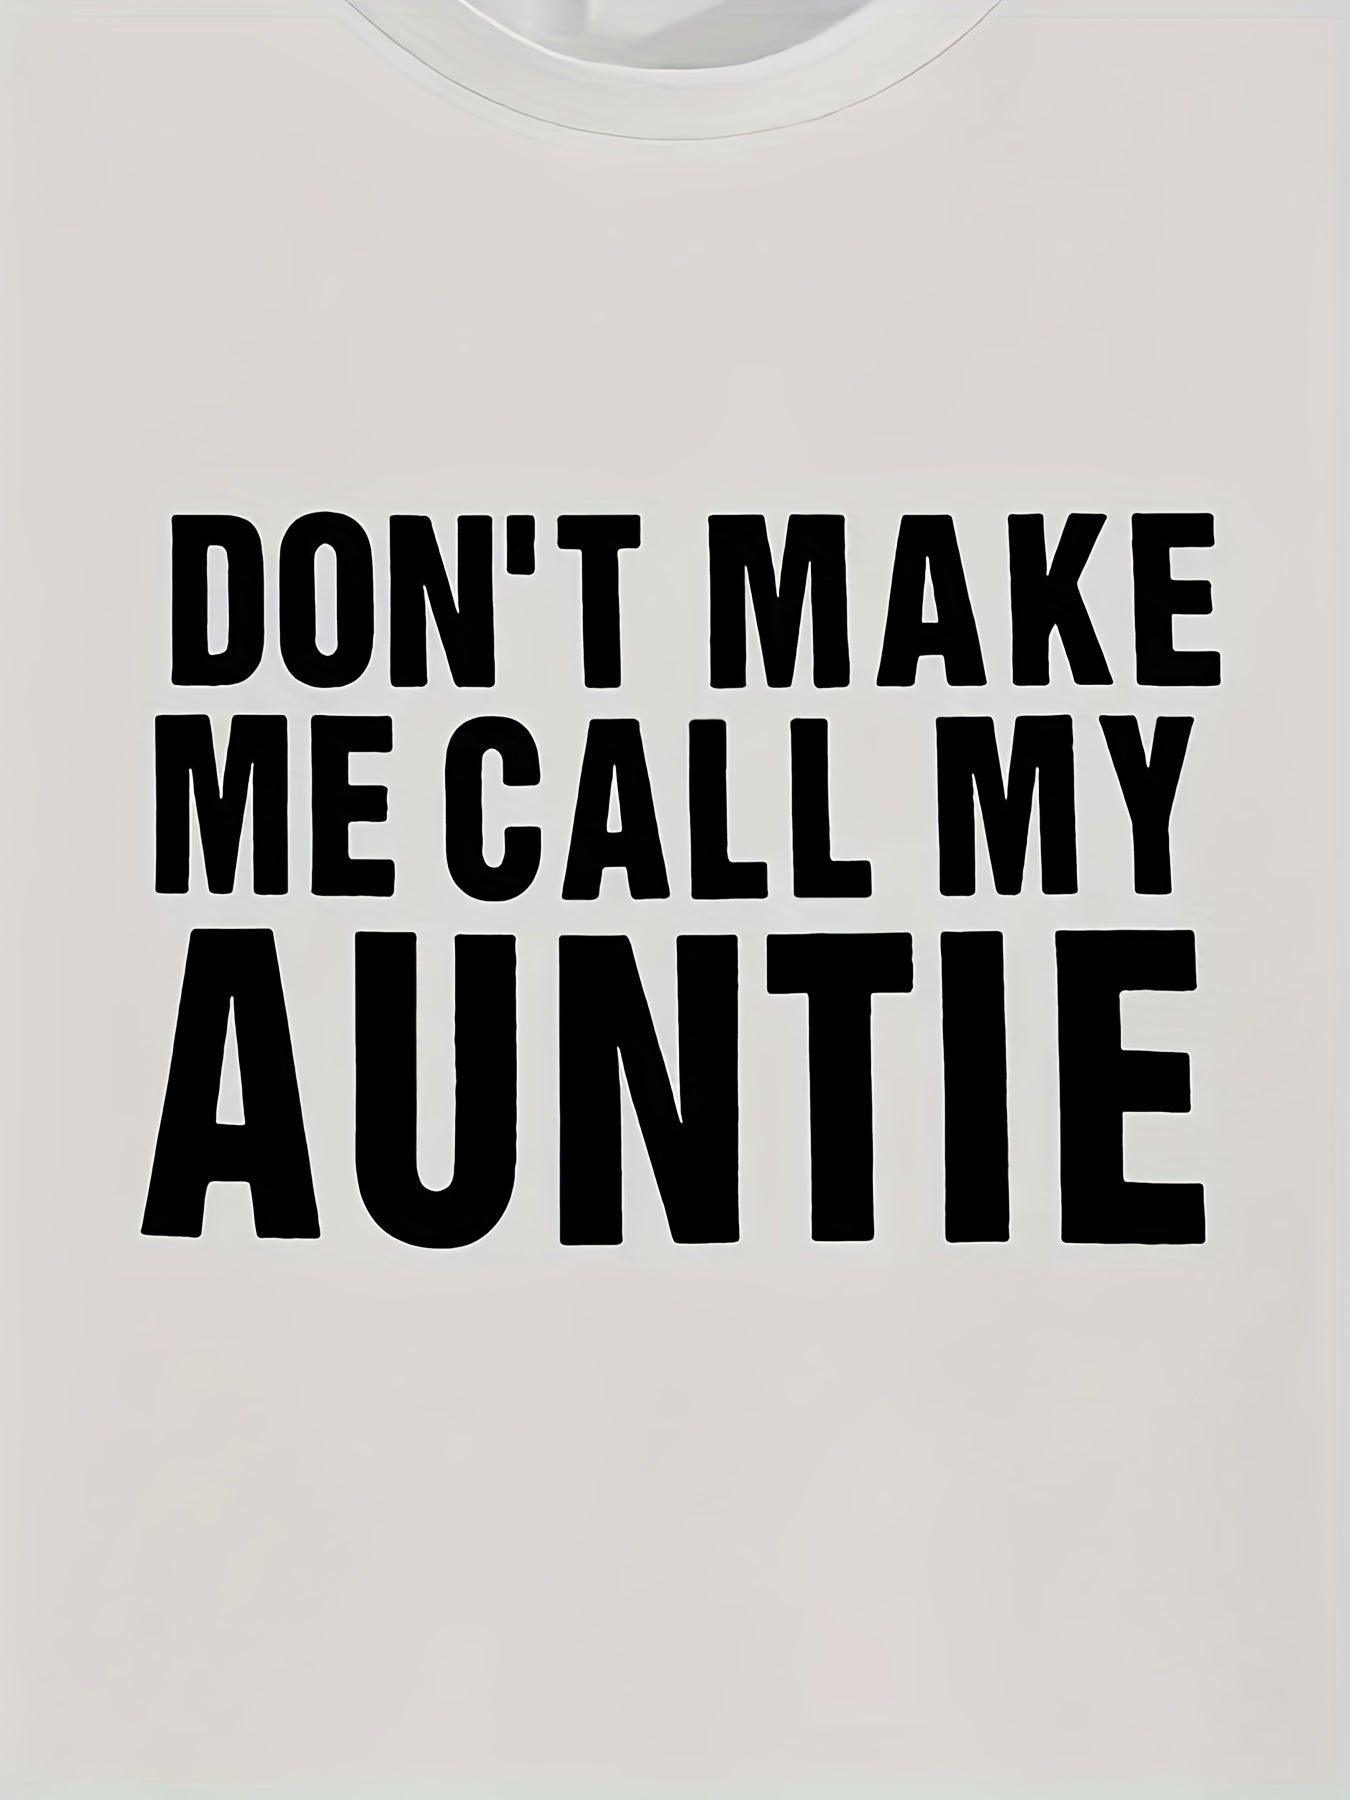 Boys "Don't Make Me Call My Auntie" Round Neck T-shirt Tees Tops Casual Soft Comfortable Summer Clothes